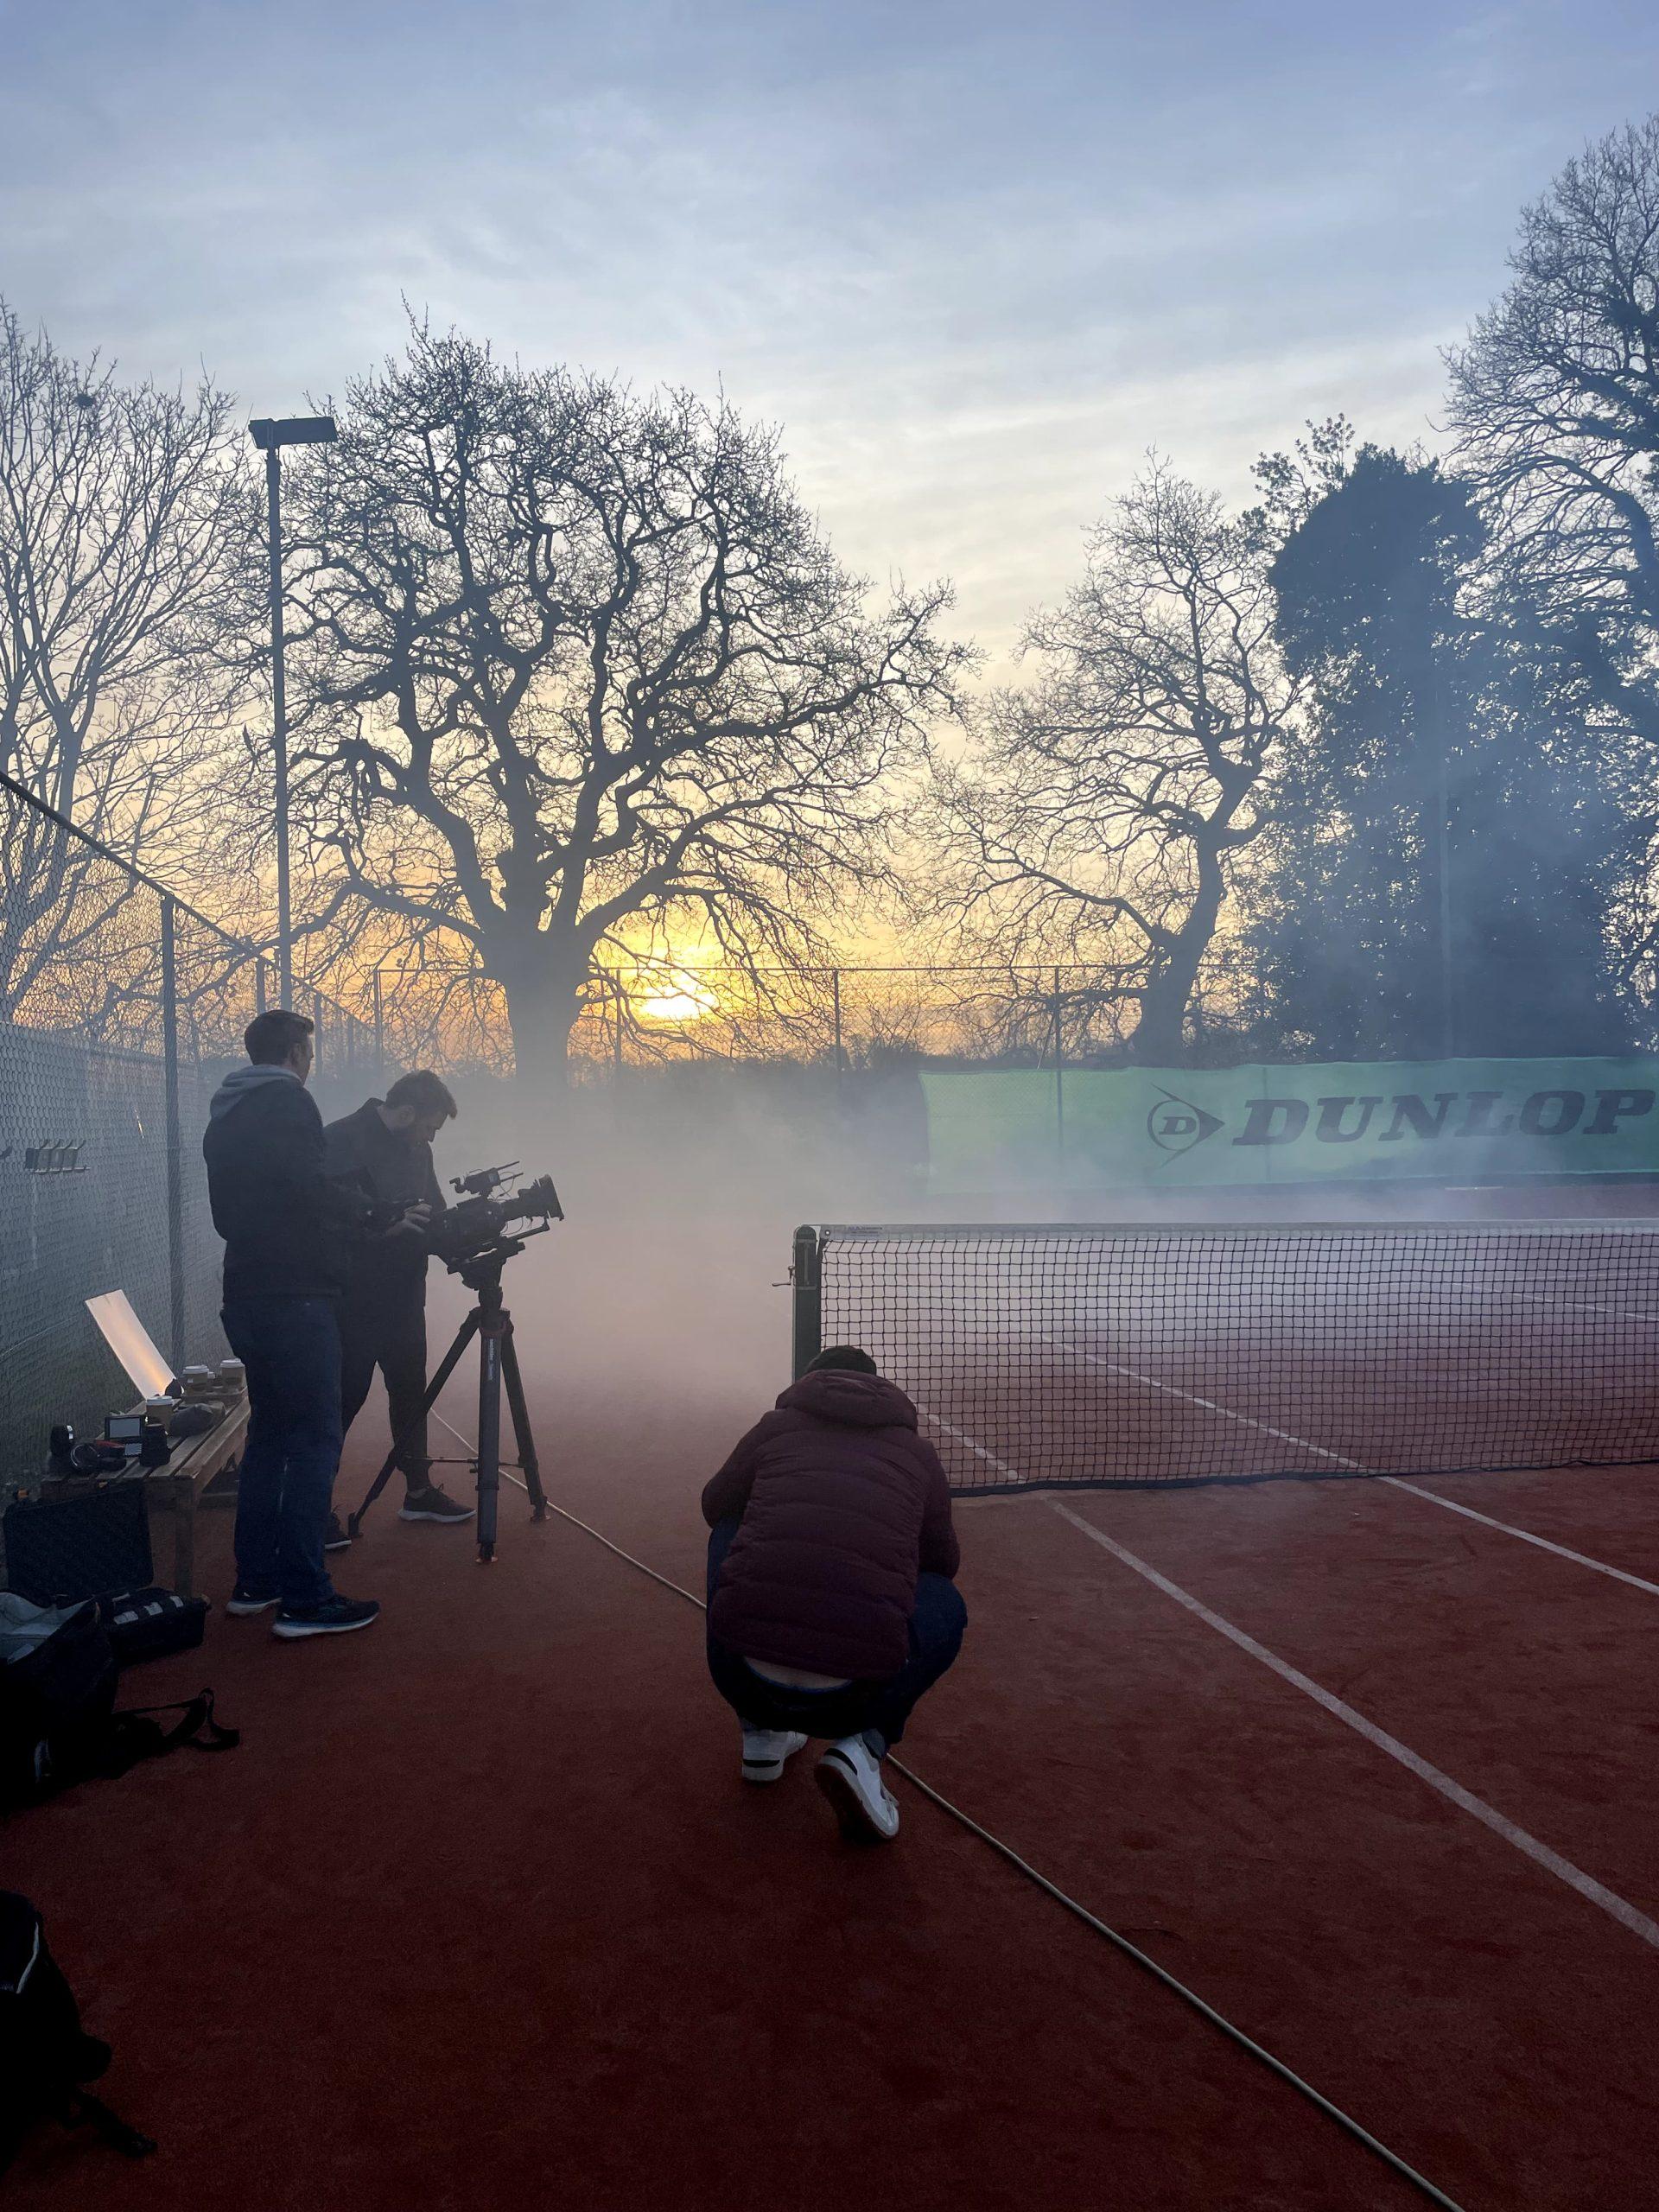 Team members from Orangery, content creation agency, videoing on a tennis court in sunrise.